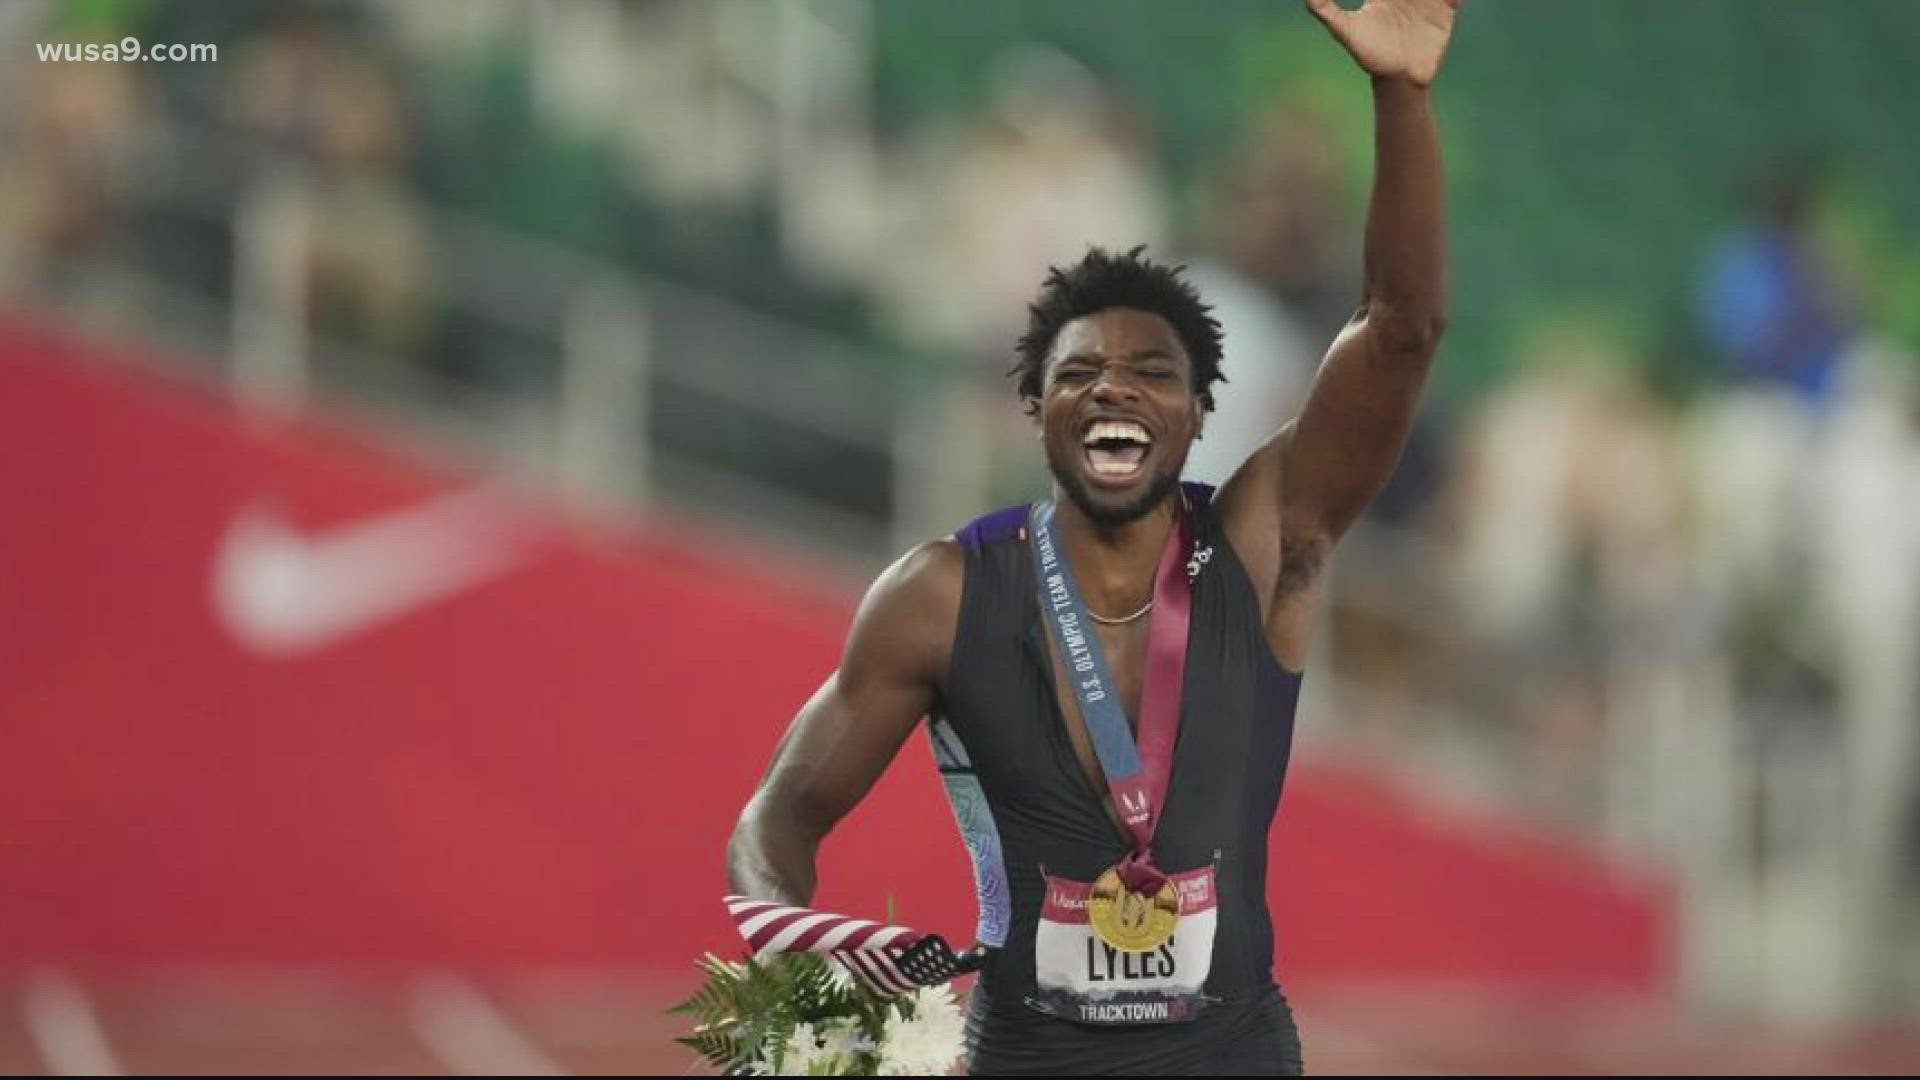 The Alexandria native is one of the top-ranked 200M runner in the world this year.